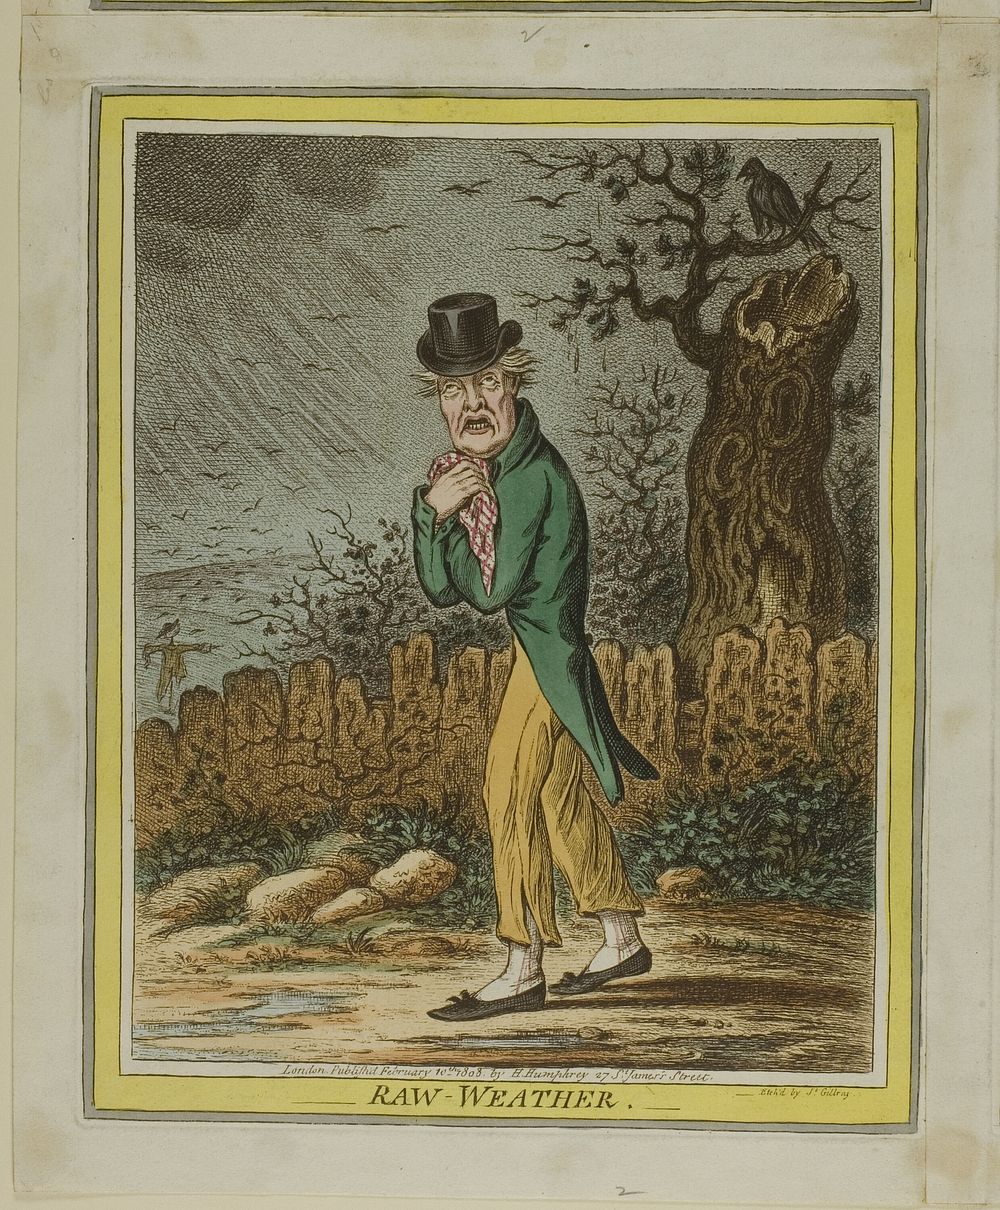 Raw Weather by James Gillray